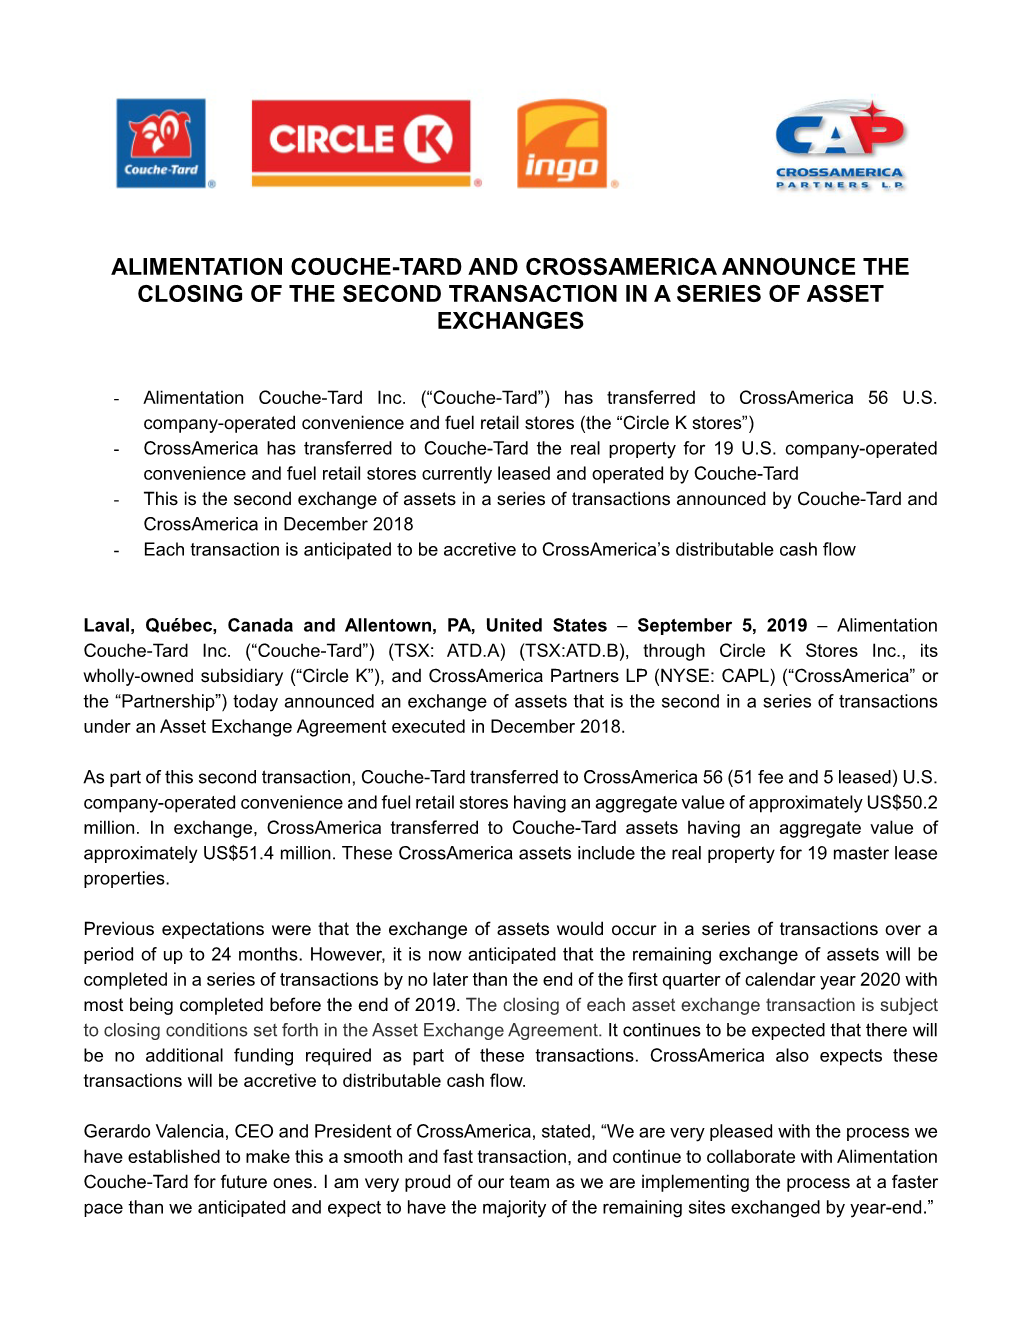 Alimentation Couche-Tard and Crossamerica Announce the Closing of the Second Transaction in a Series of Asset Exchanges